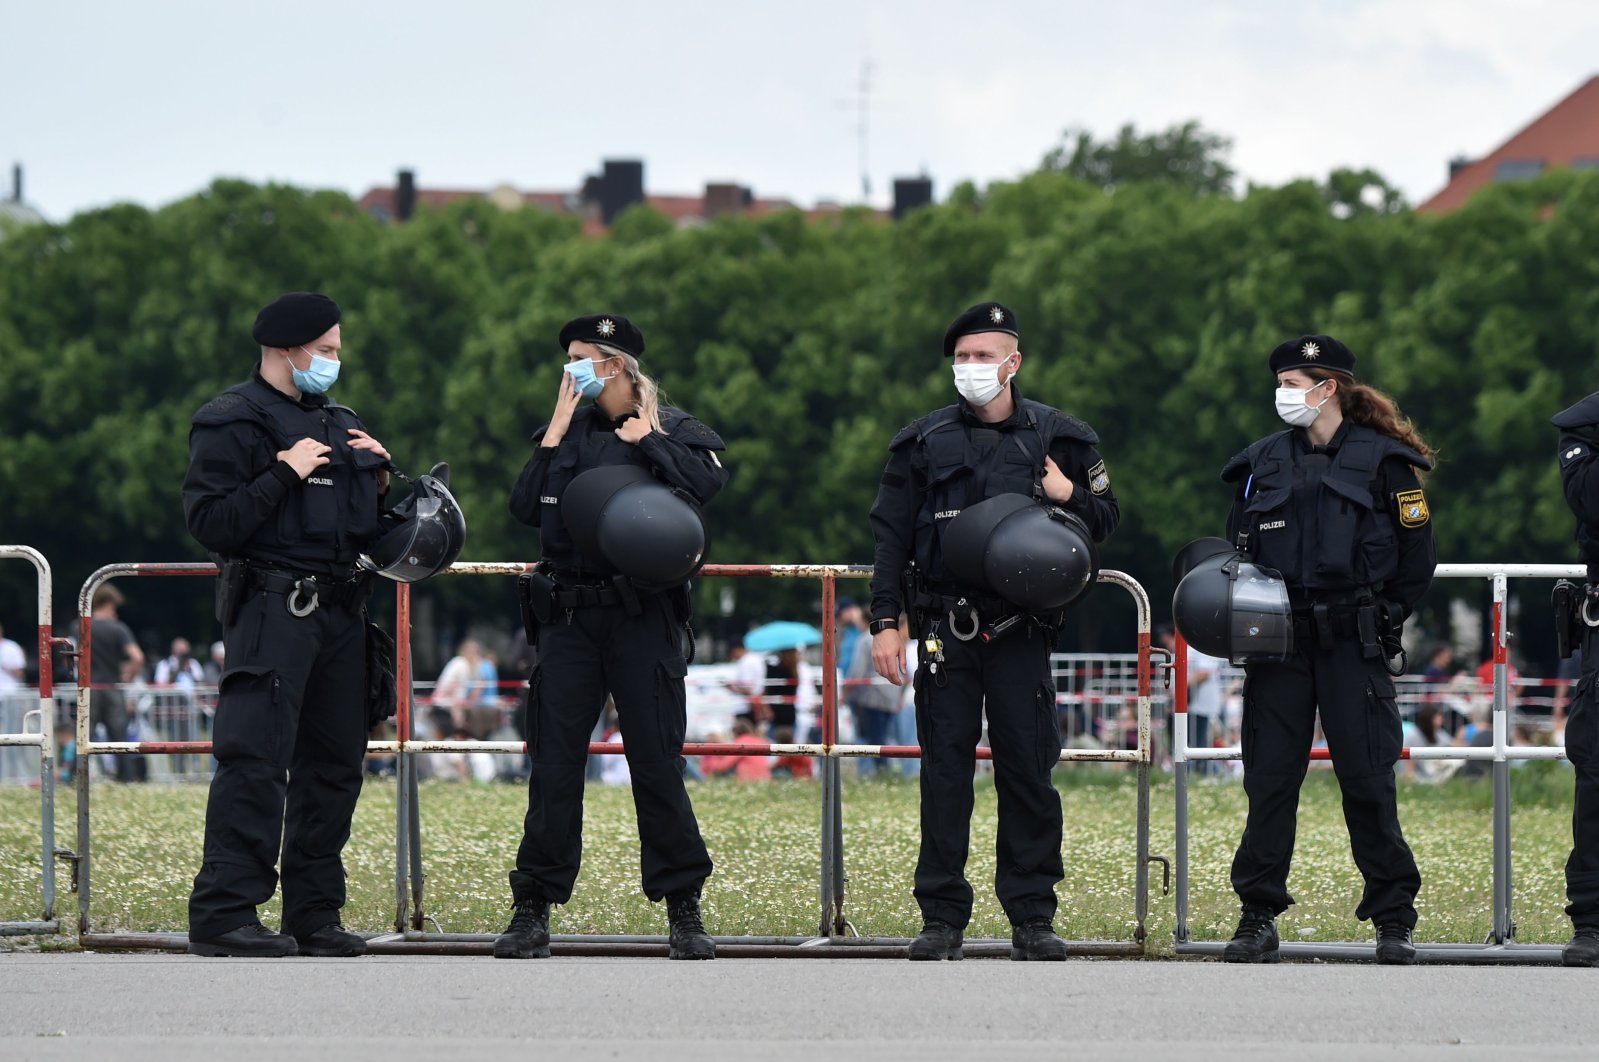 Police officers stand guard in front of a demonstration, Munich, Germany, May 23, 2020. (AFP Photo)